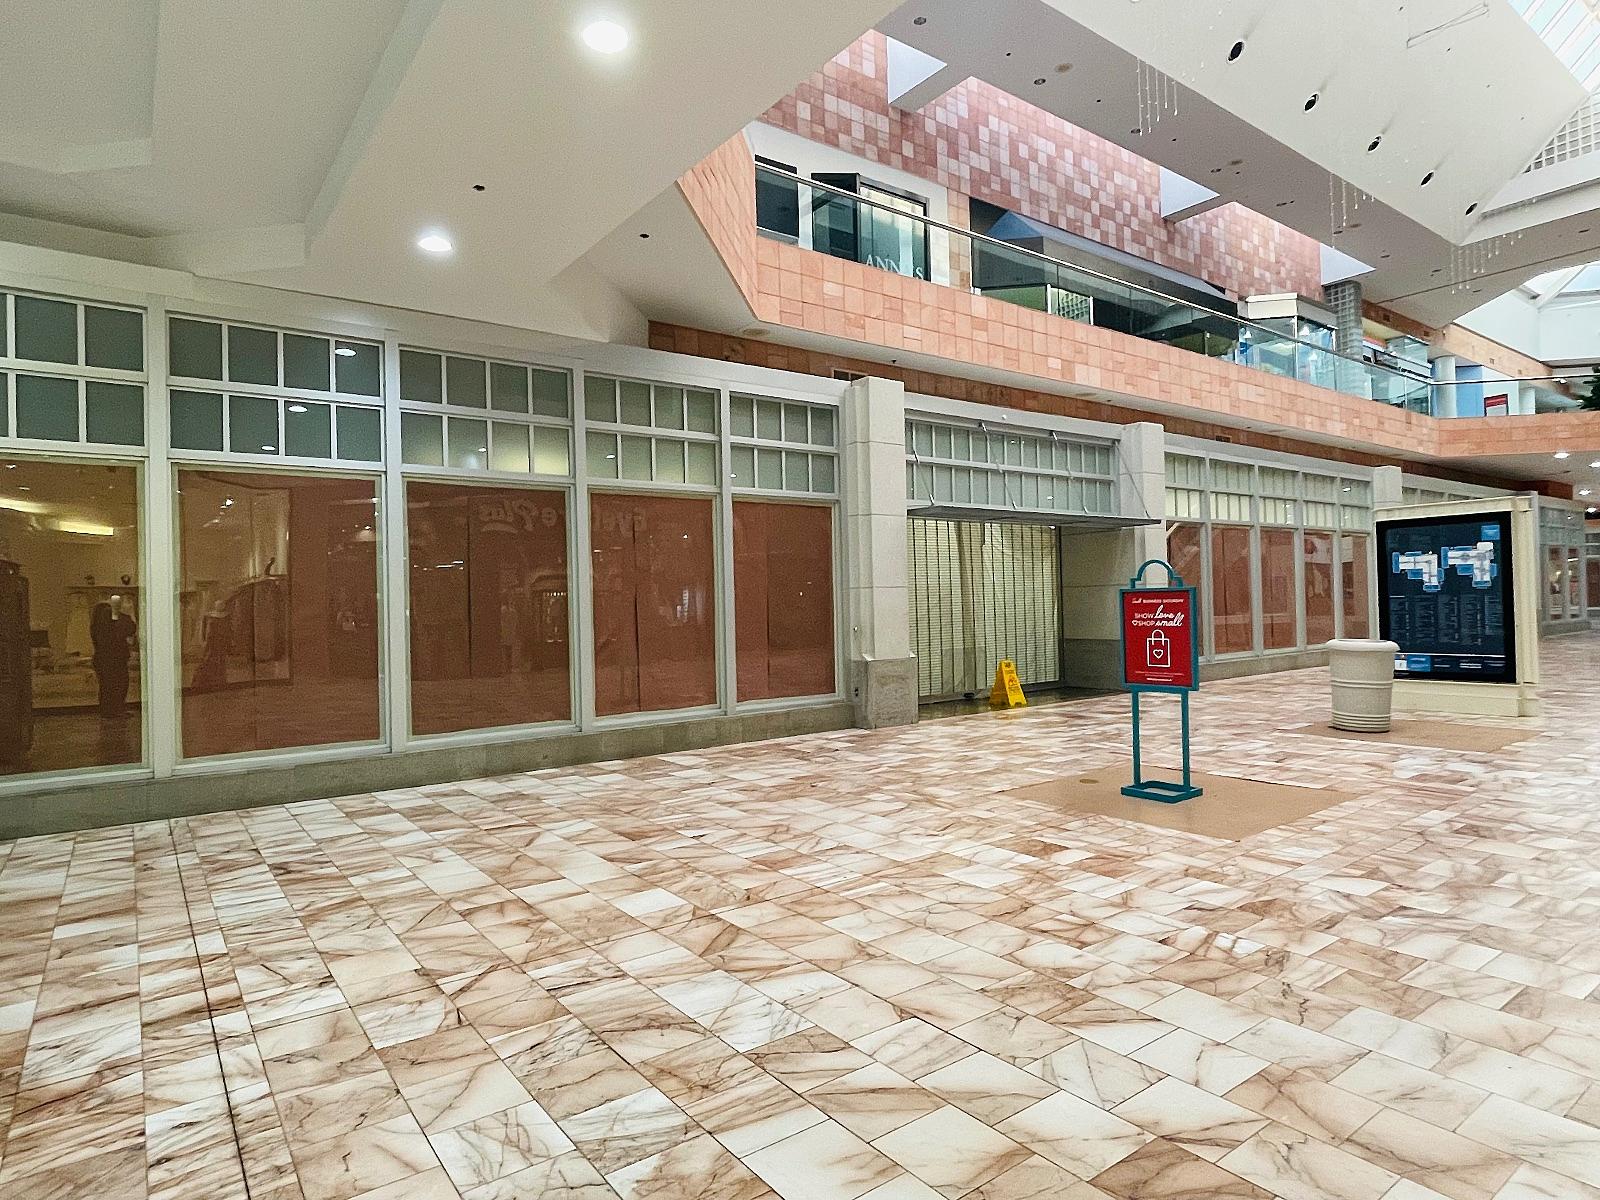 Ross Park Mall could feature theater, fitness center in vacant Sears store